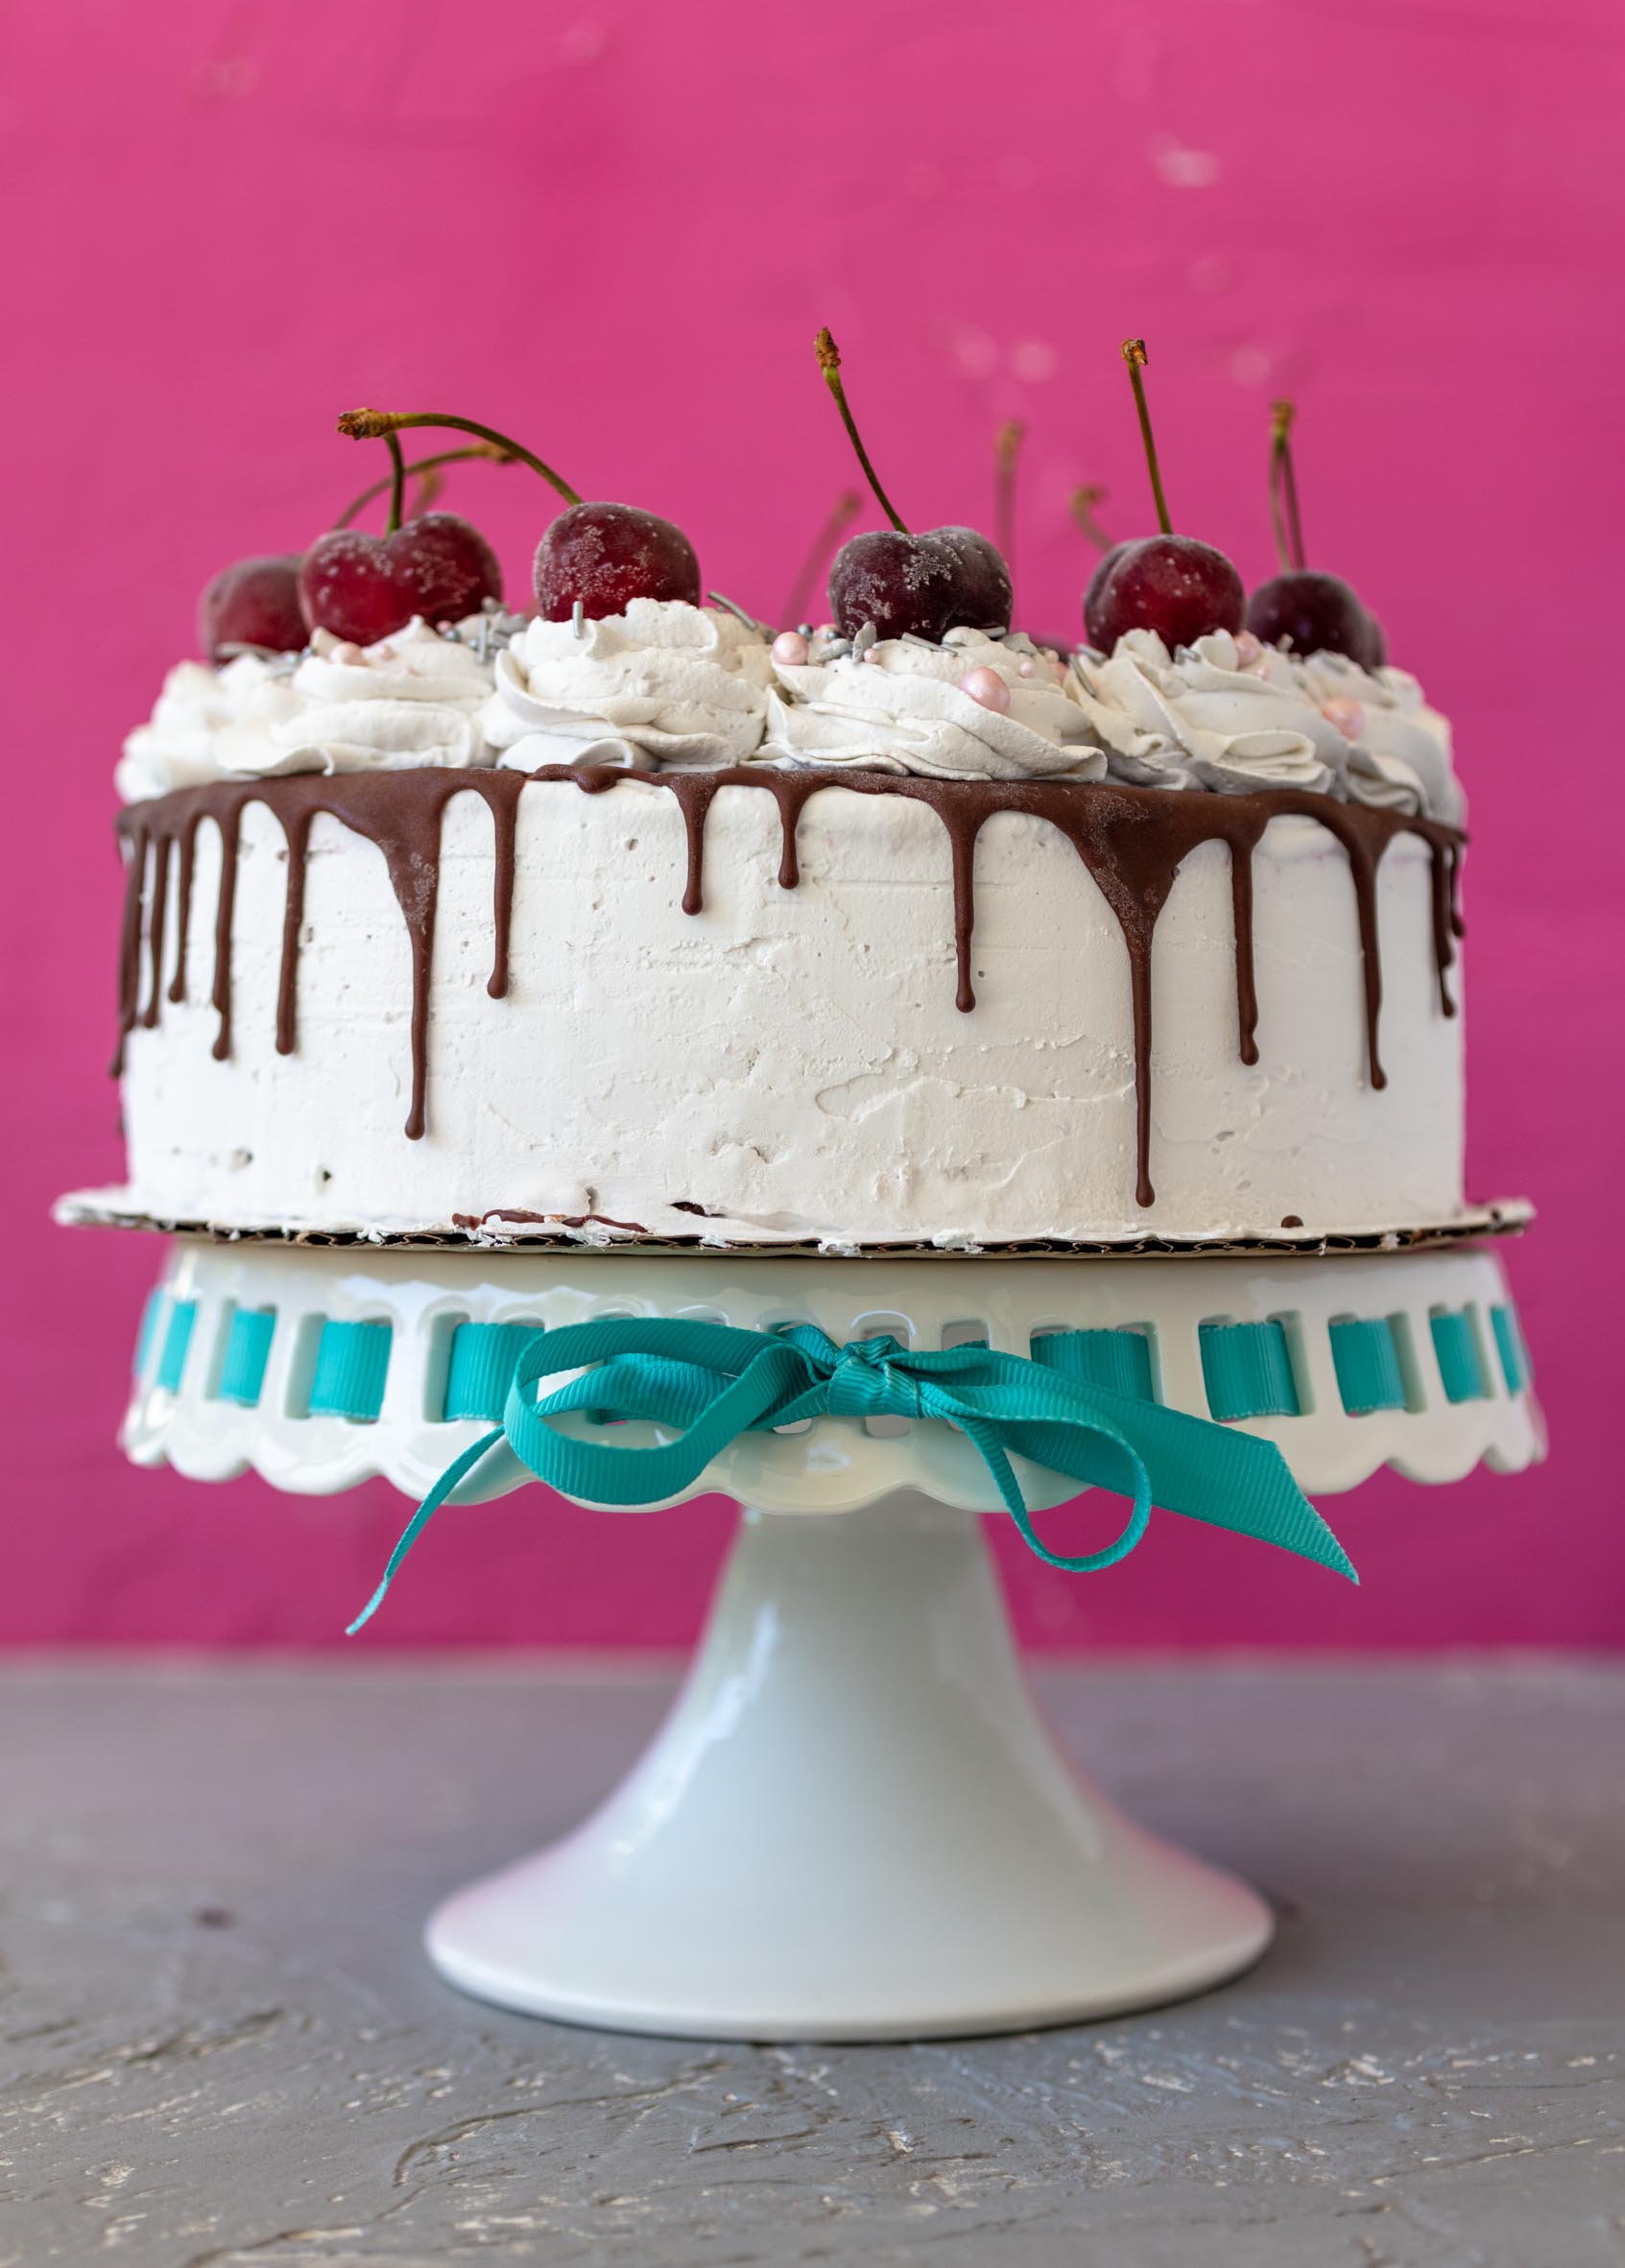 vegan ice cream cake with chocolate drips down the sides and frosty cherries on top